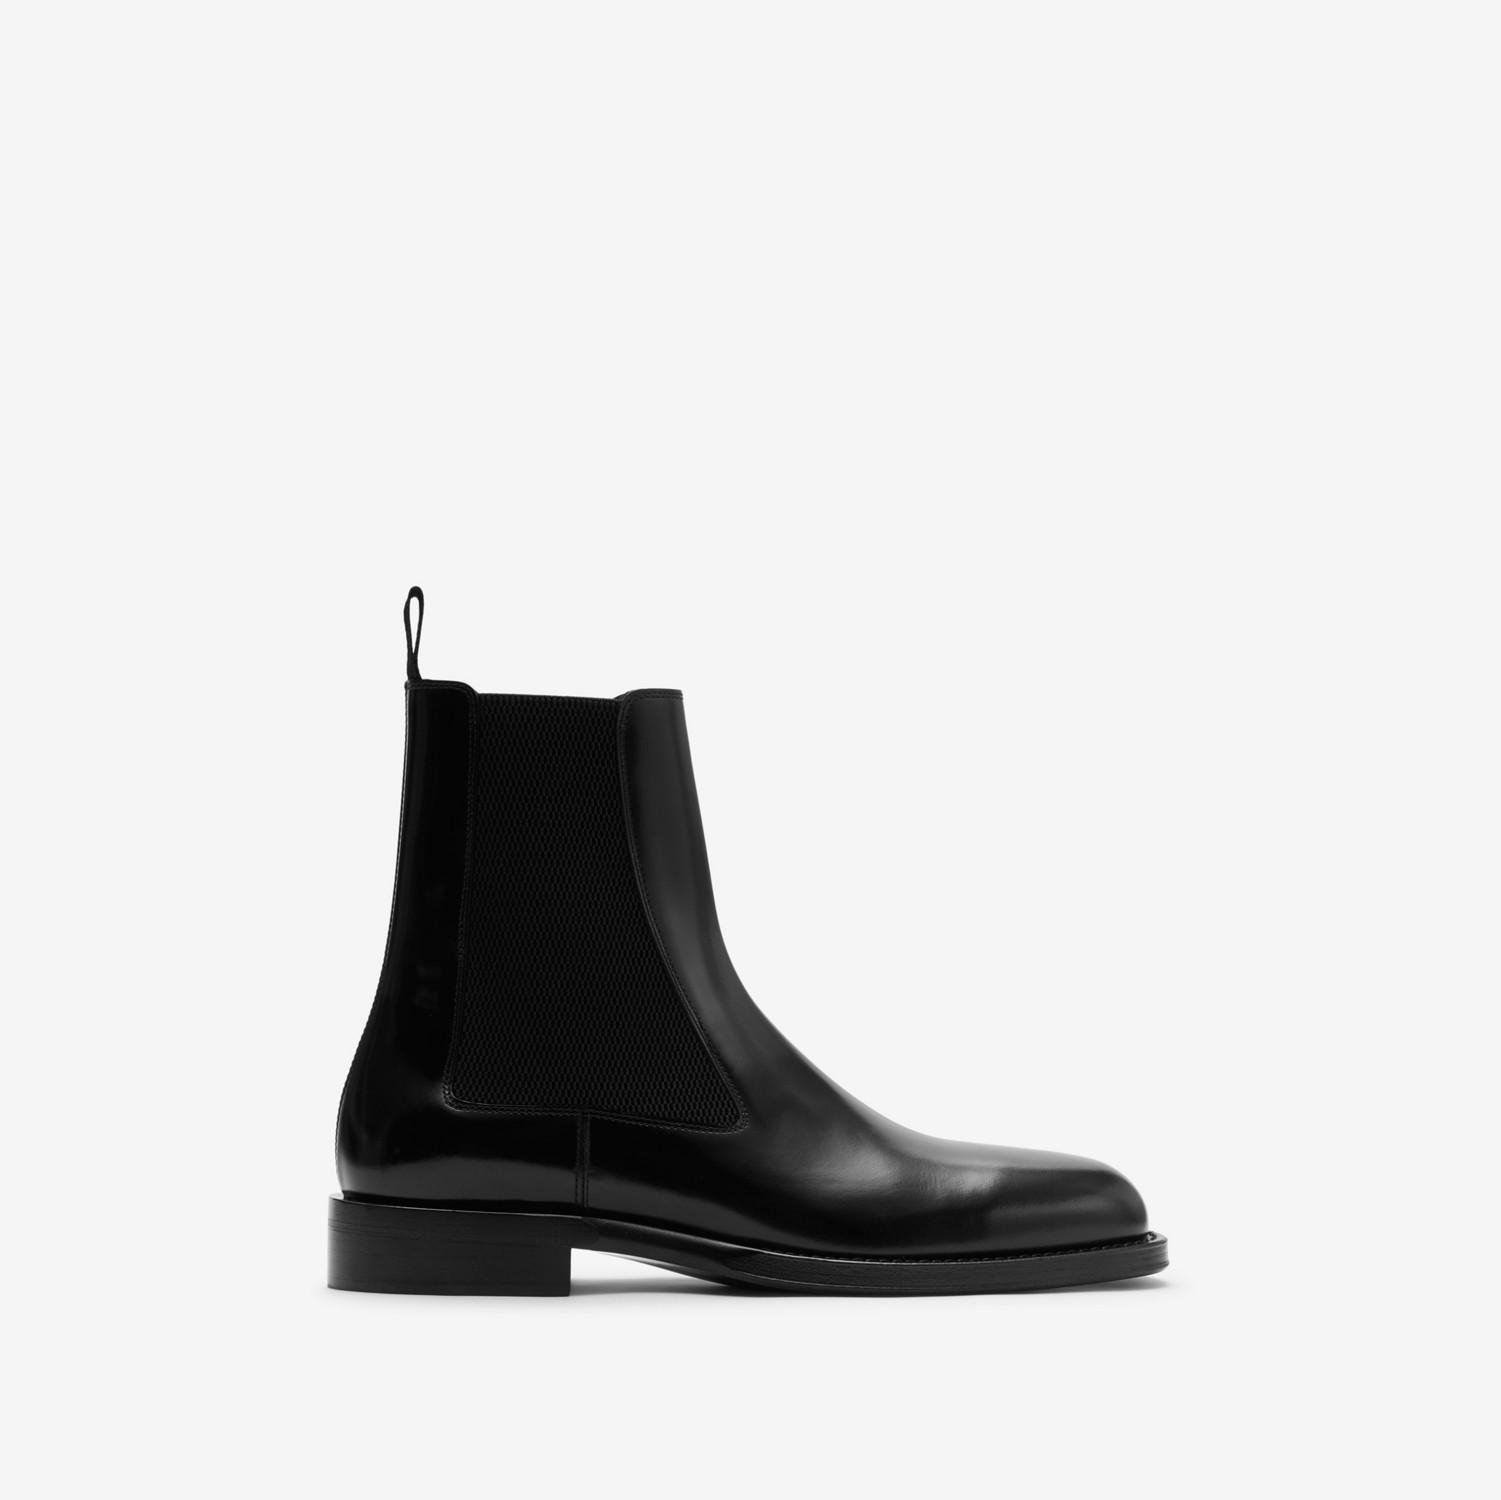 Leather Tux High Chelsea Boots​ by BURBERRY